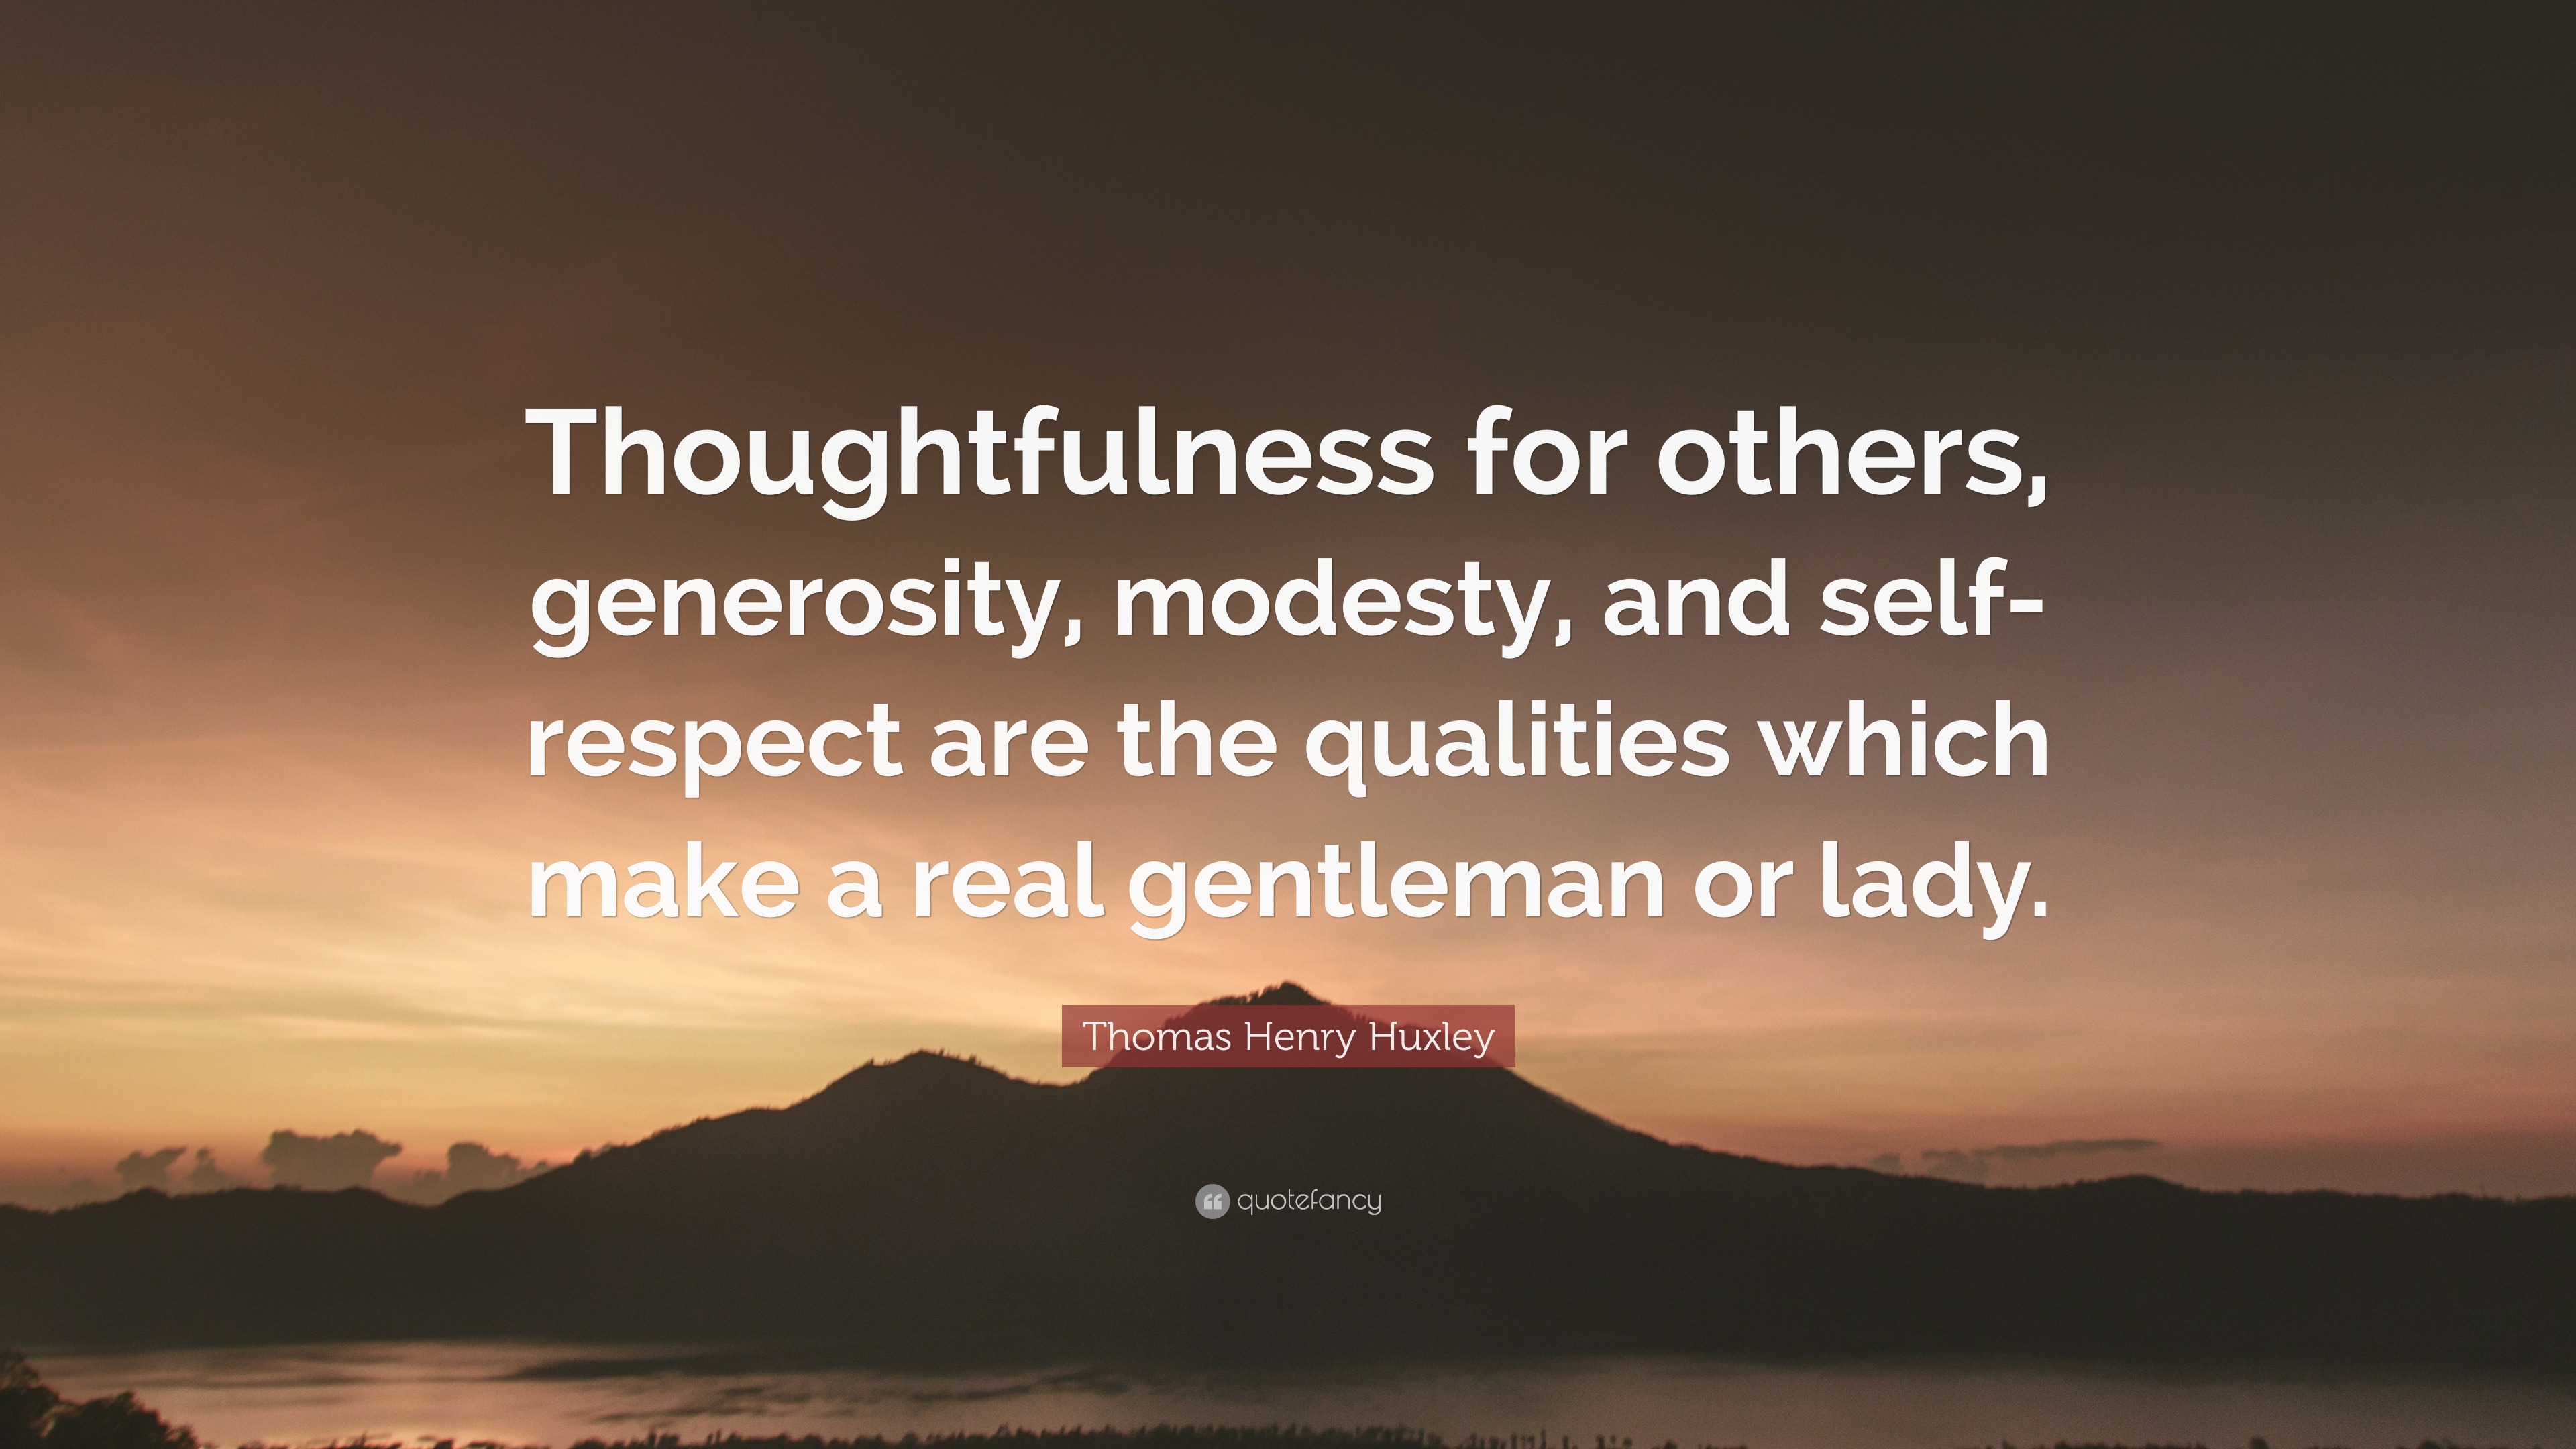 Thomas Henry Huxley Quote: “Thoughtfulness for others, generosity ...